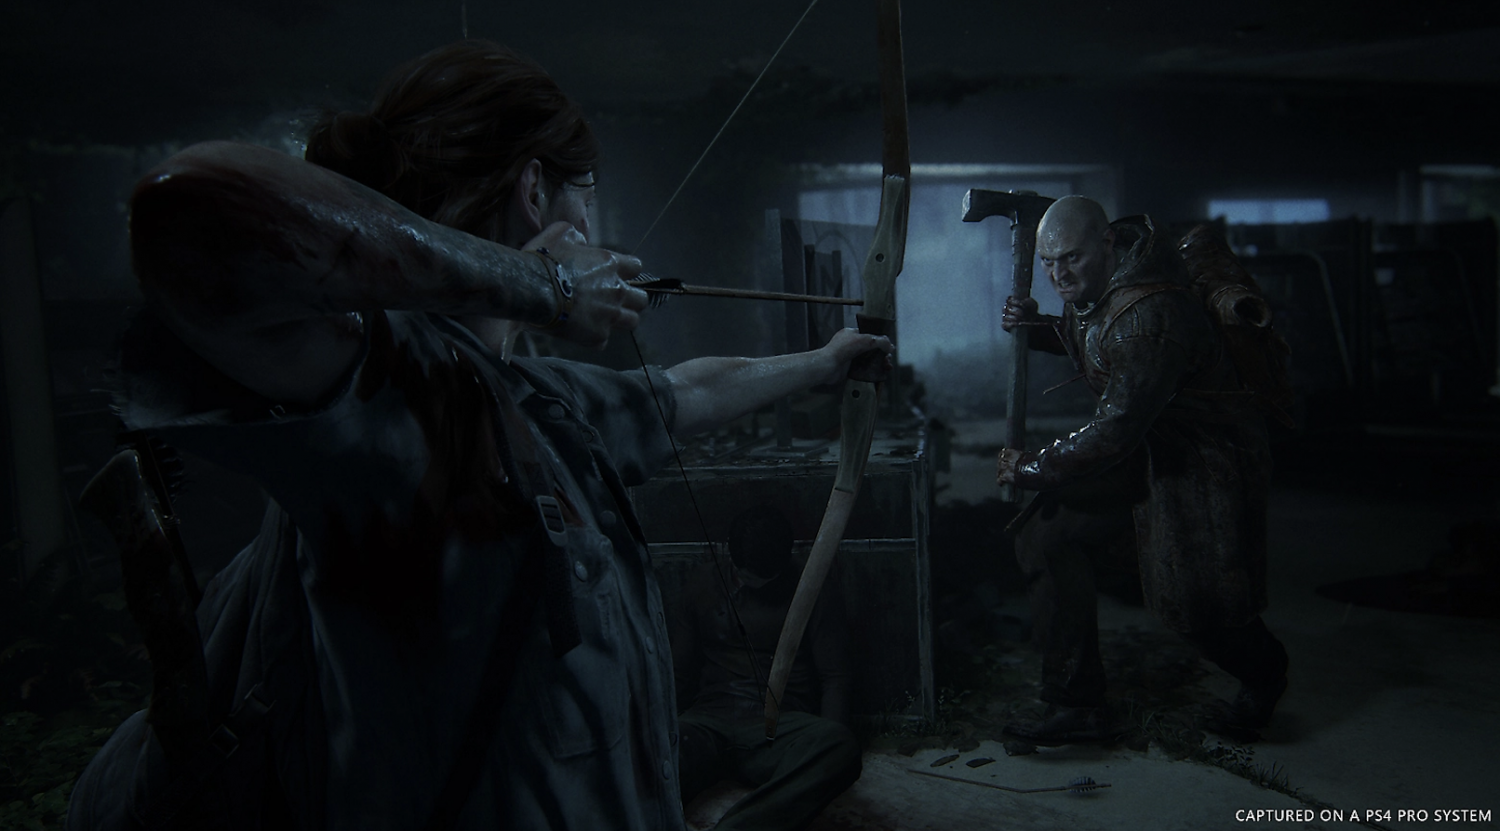 Naughty Dog issues statement on no Last of Us Part 2 multiplayer